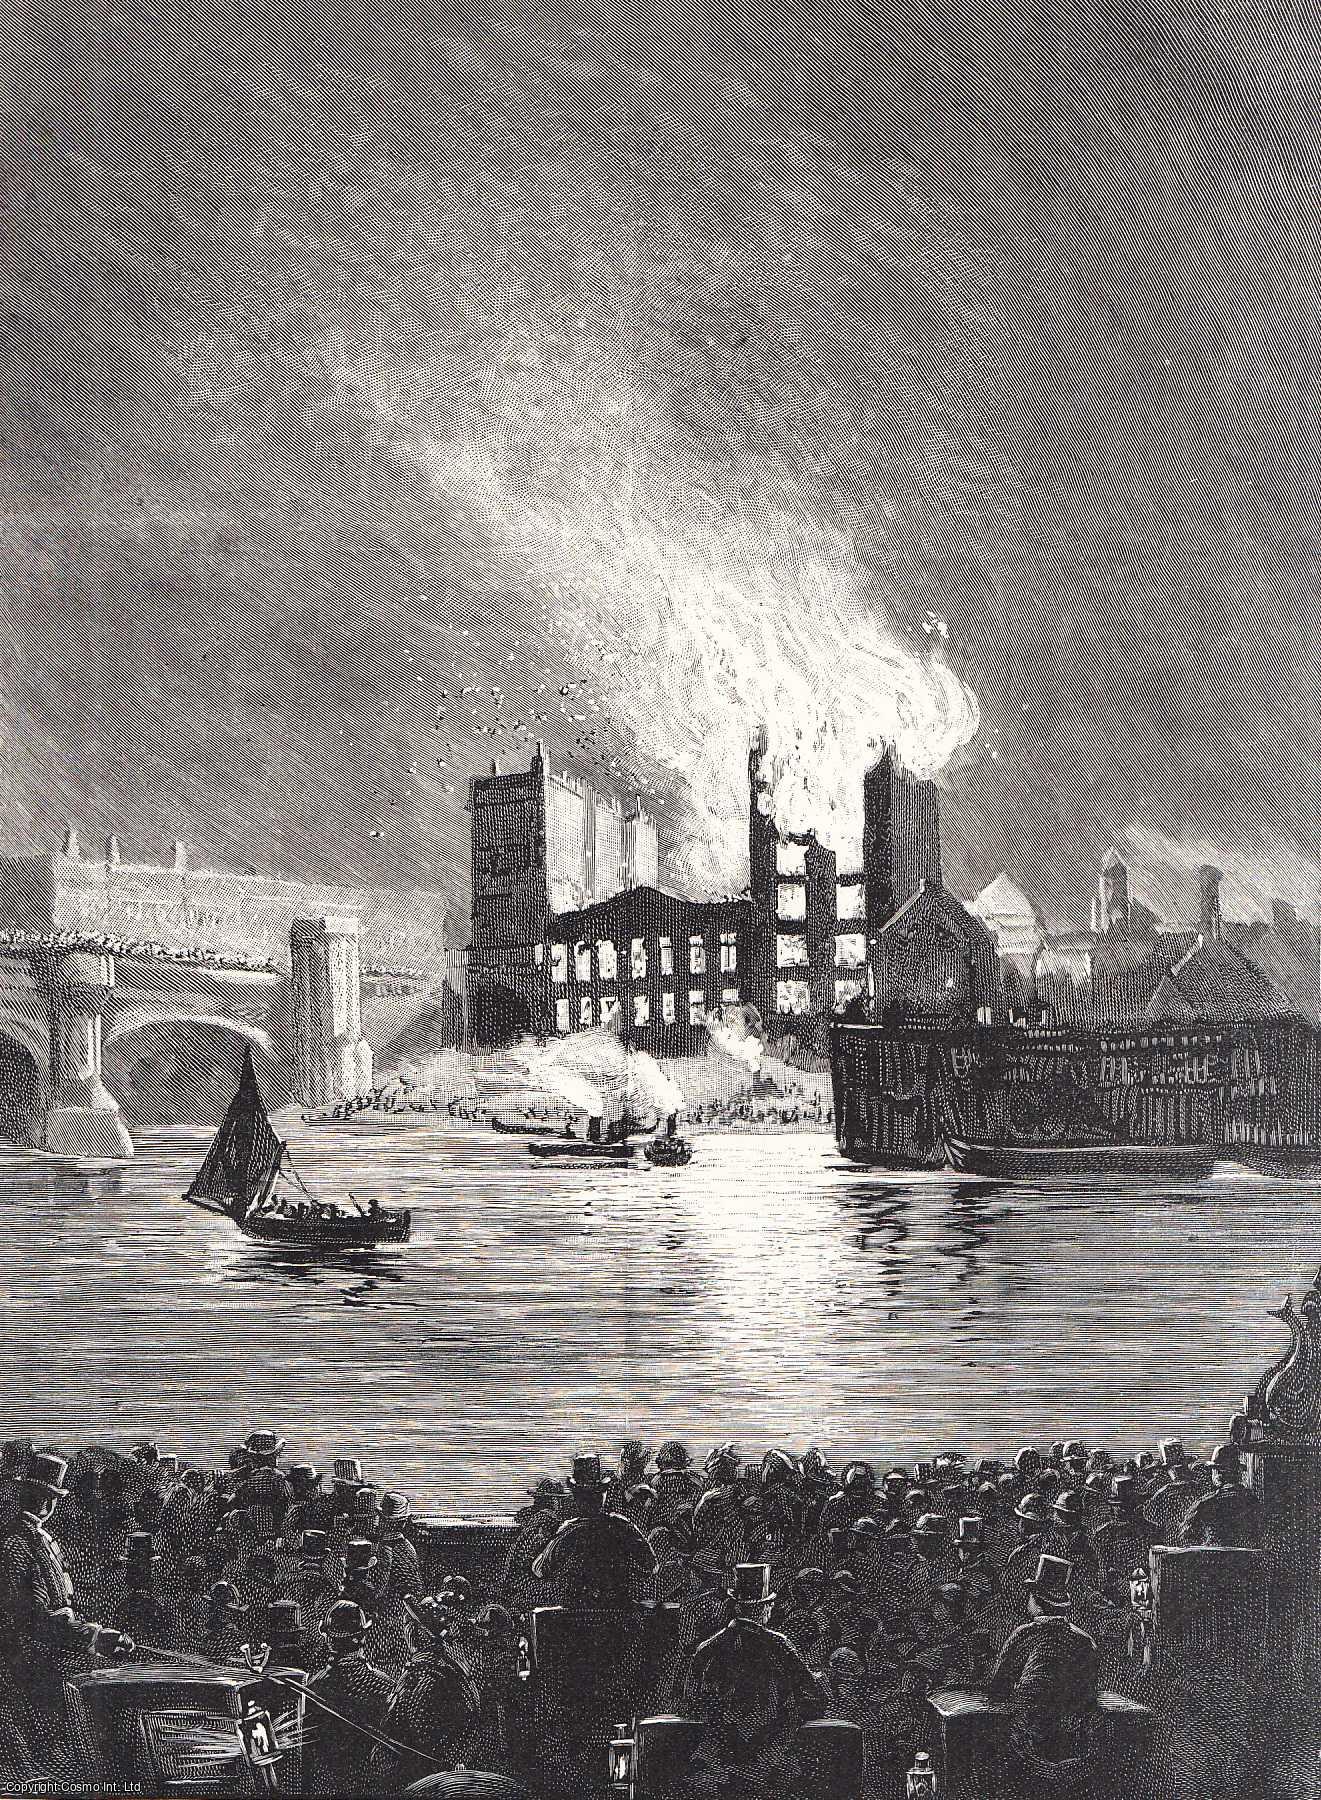 LONDON - The Great Fire at Hanbury's Wharf, Blackfriars, London, August 24th, 1895. An original print from the Illustrated London News, 1895.